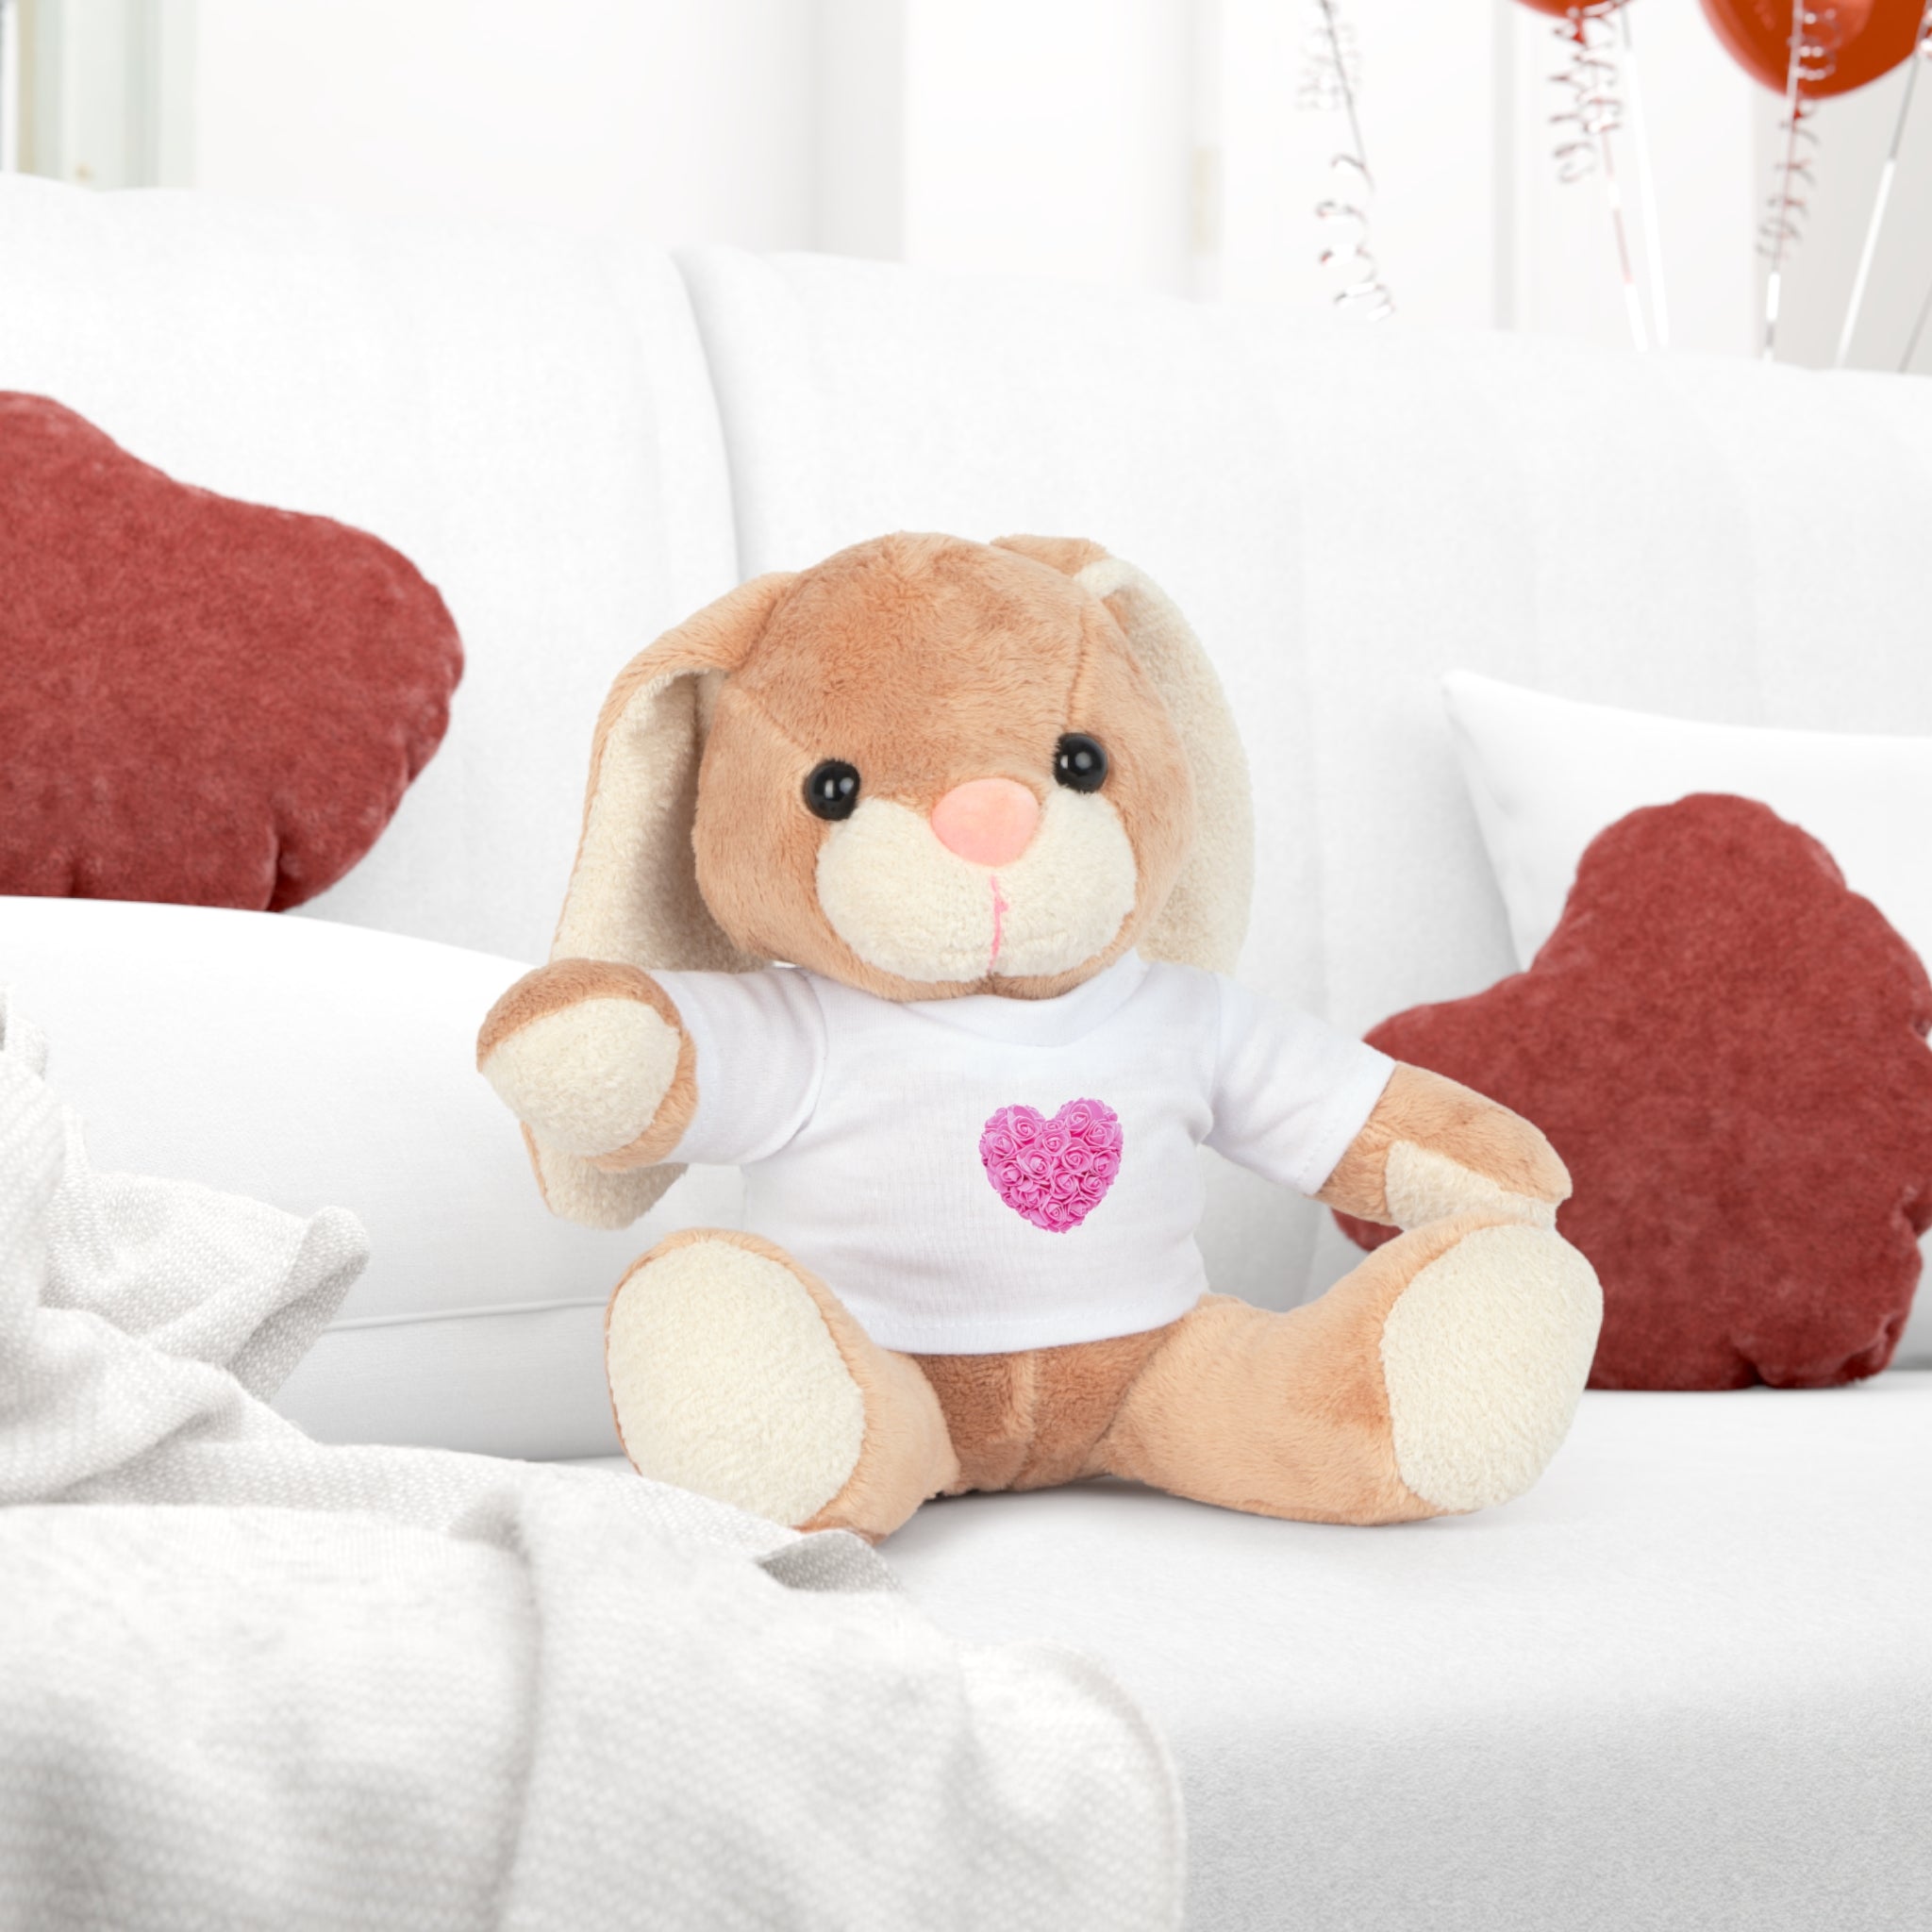 Pink Flower Heart Plush Toy with T-Shirt